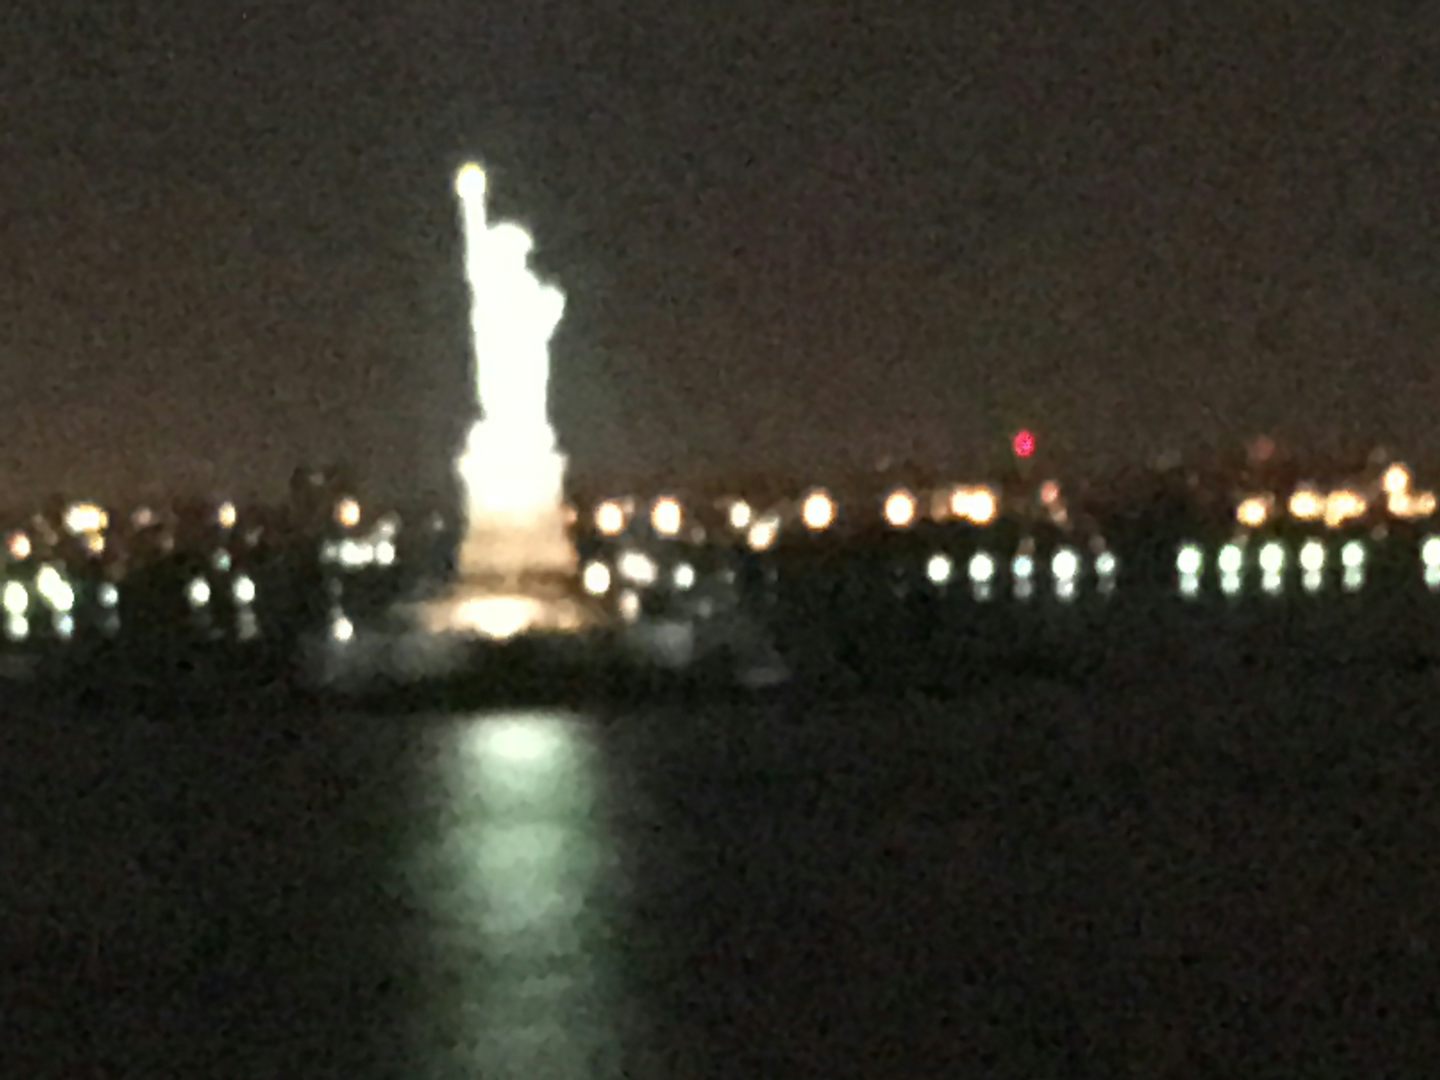 Welcome Home - Lady Liberty at 5am. What an awesome sight. If this does not